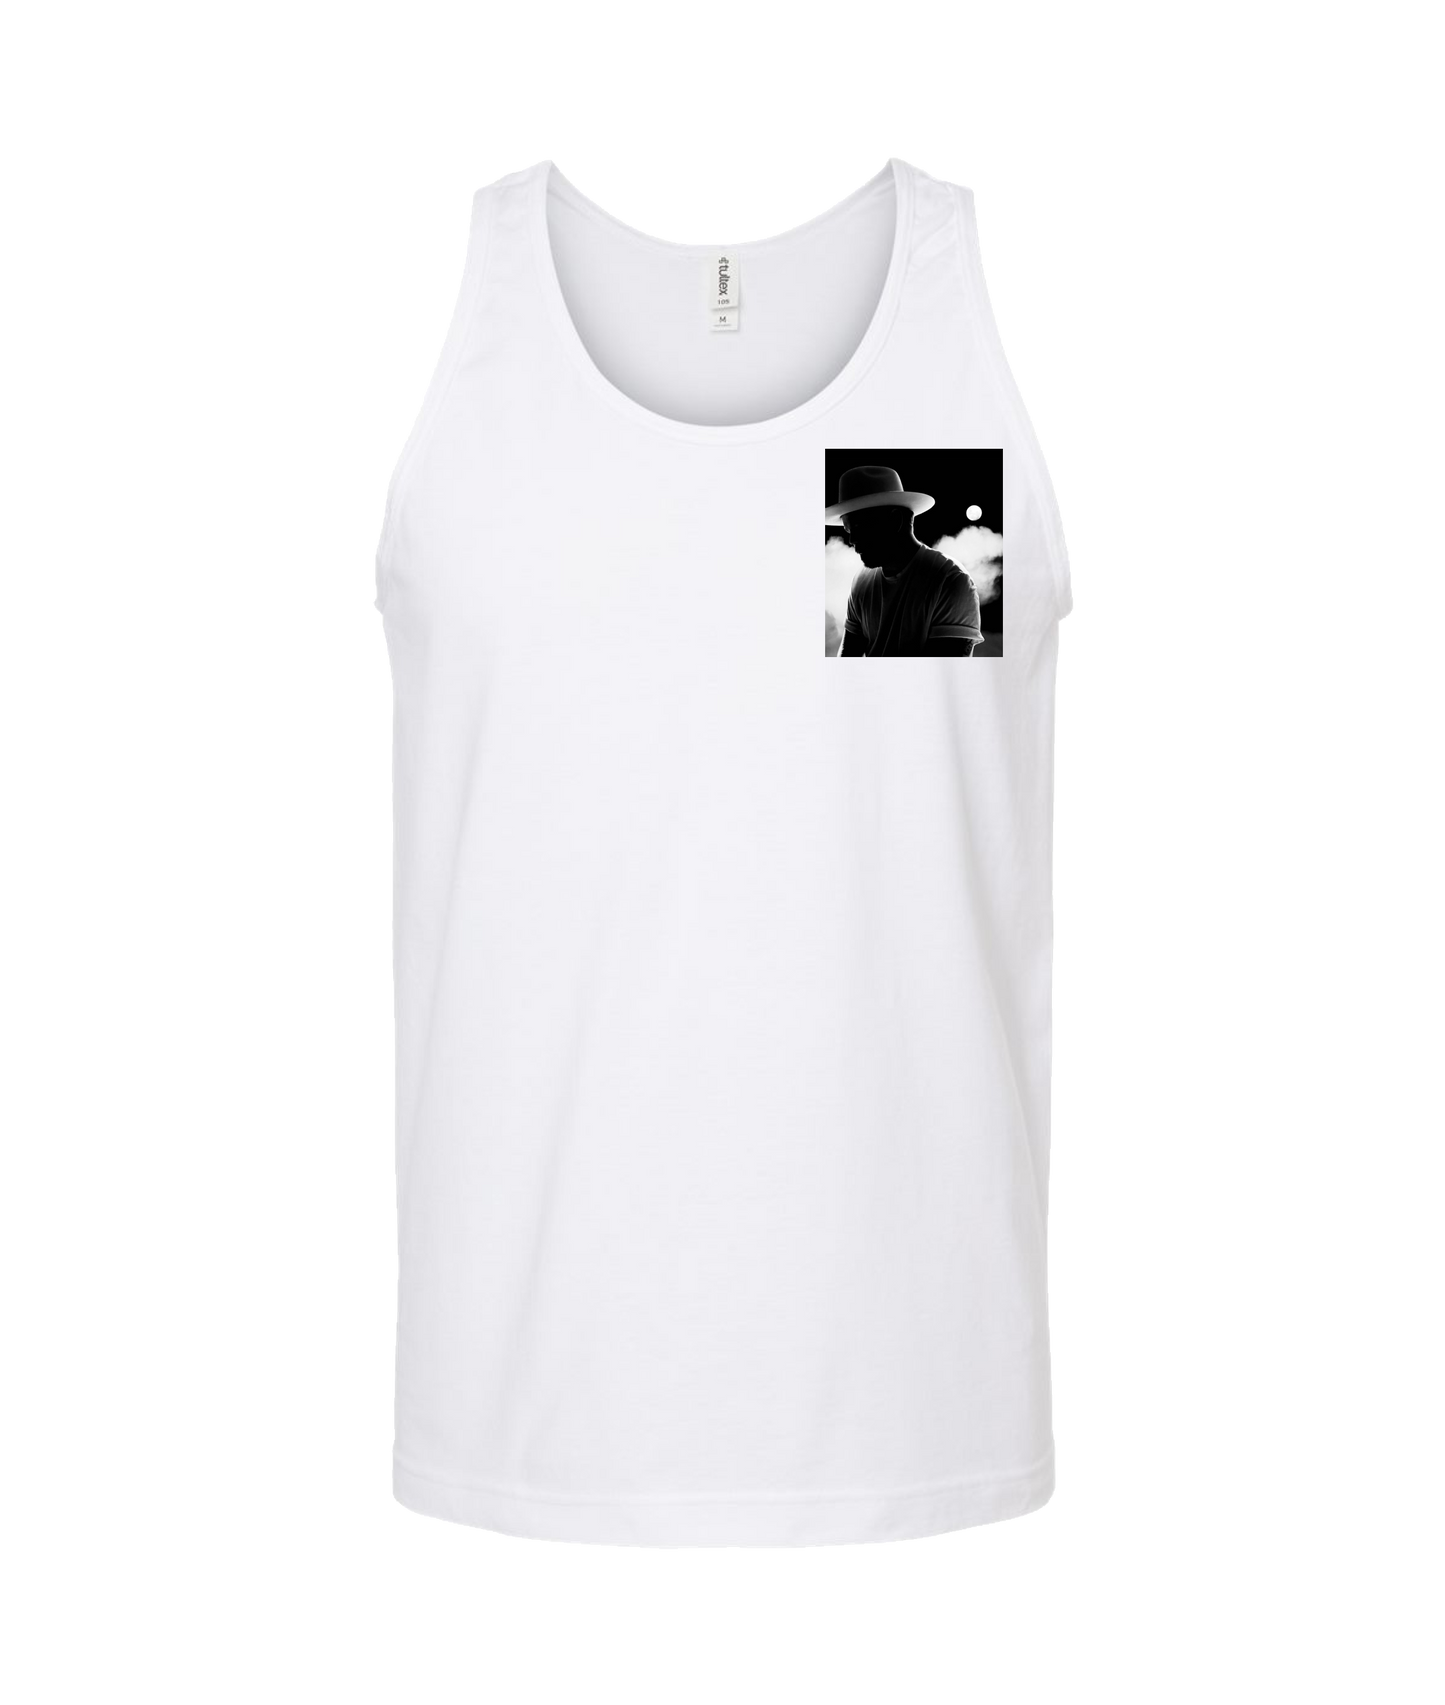 Andy Crosby Music - Holy Vices - White Tank Top